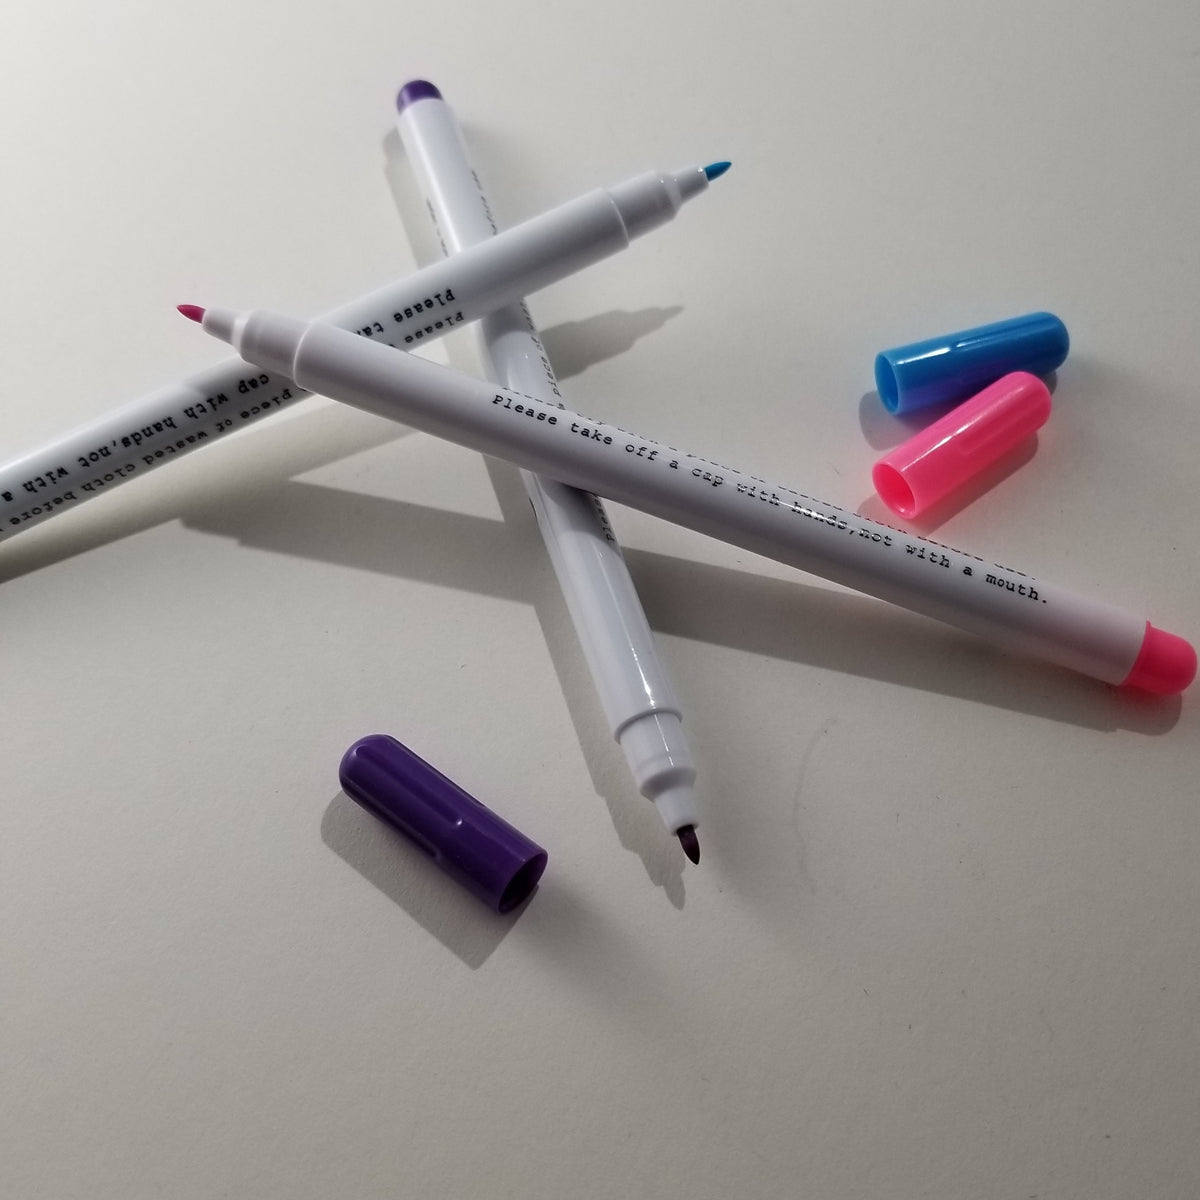 Disappearing Ink Pen White – American Embroidery Supply